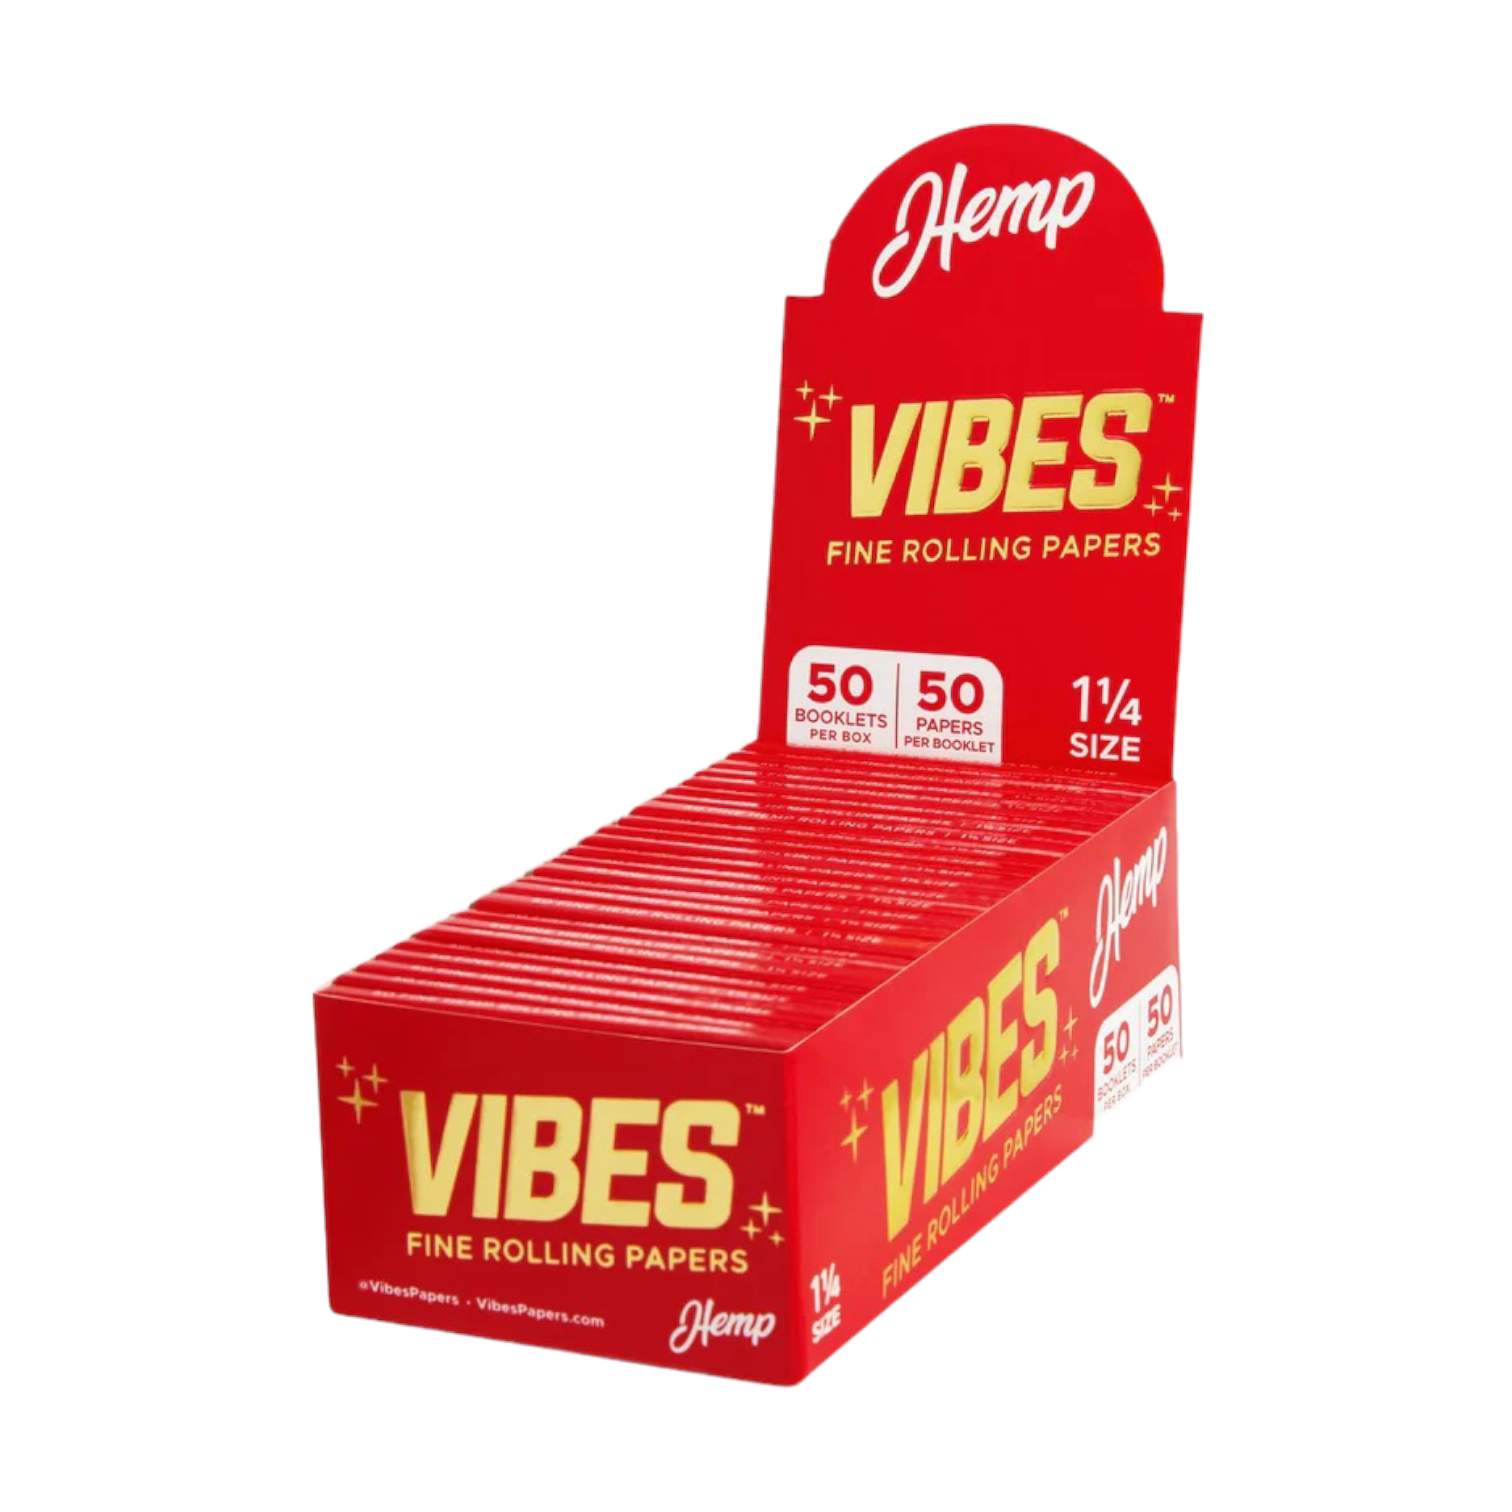 VIBES - BOX Of Hemp 1.25 Papers - 50 Pack Box